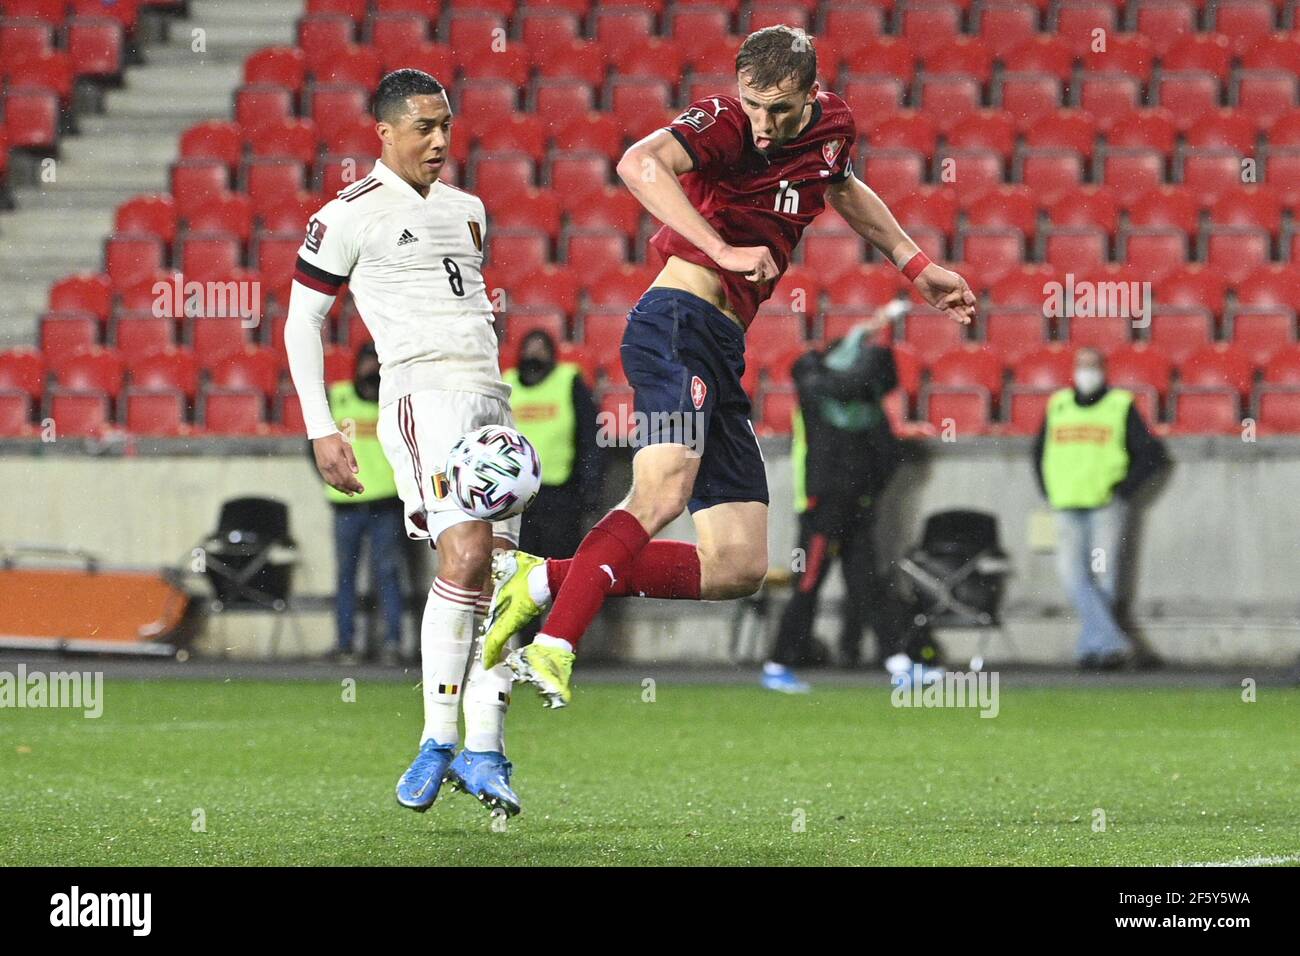 Prague, Czech Republic. 27th Mar, 2021. L-R Youri Tielemans (Belegium) and Tomas Soucek (Czech) in action during the World Cup qualifier group E: Czechia vs Belgium in Prague, Czech Republic, on Saturday, March 27, 2021. Credit: Michal Kamaryt/CTK Photo/Alamy Live News Stock Photo